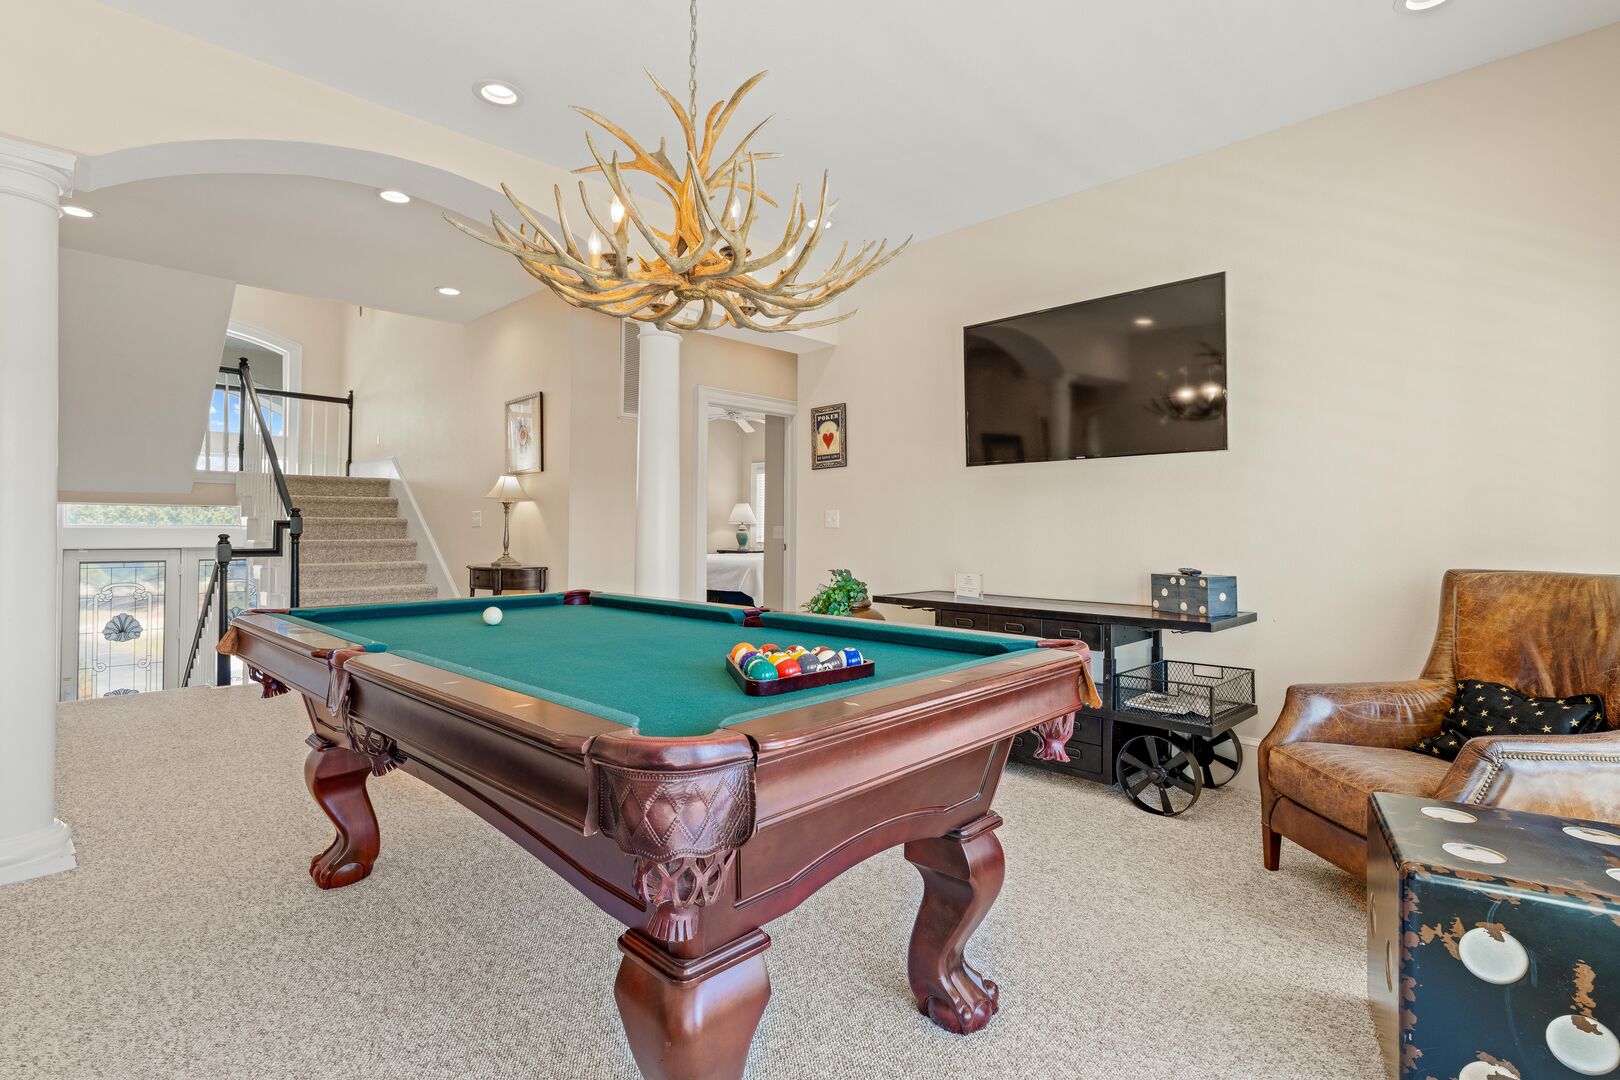 Den with Pool Table - Mid Level